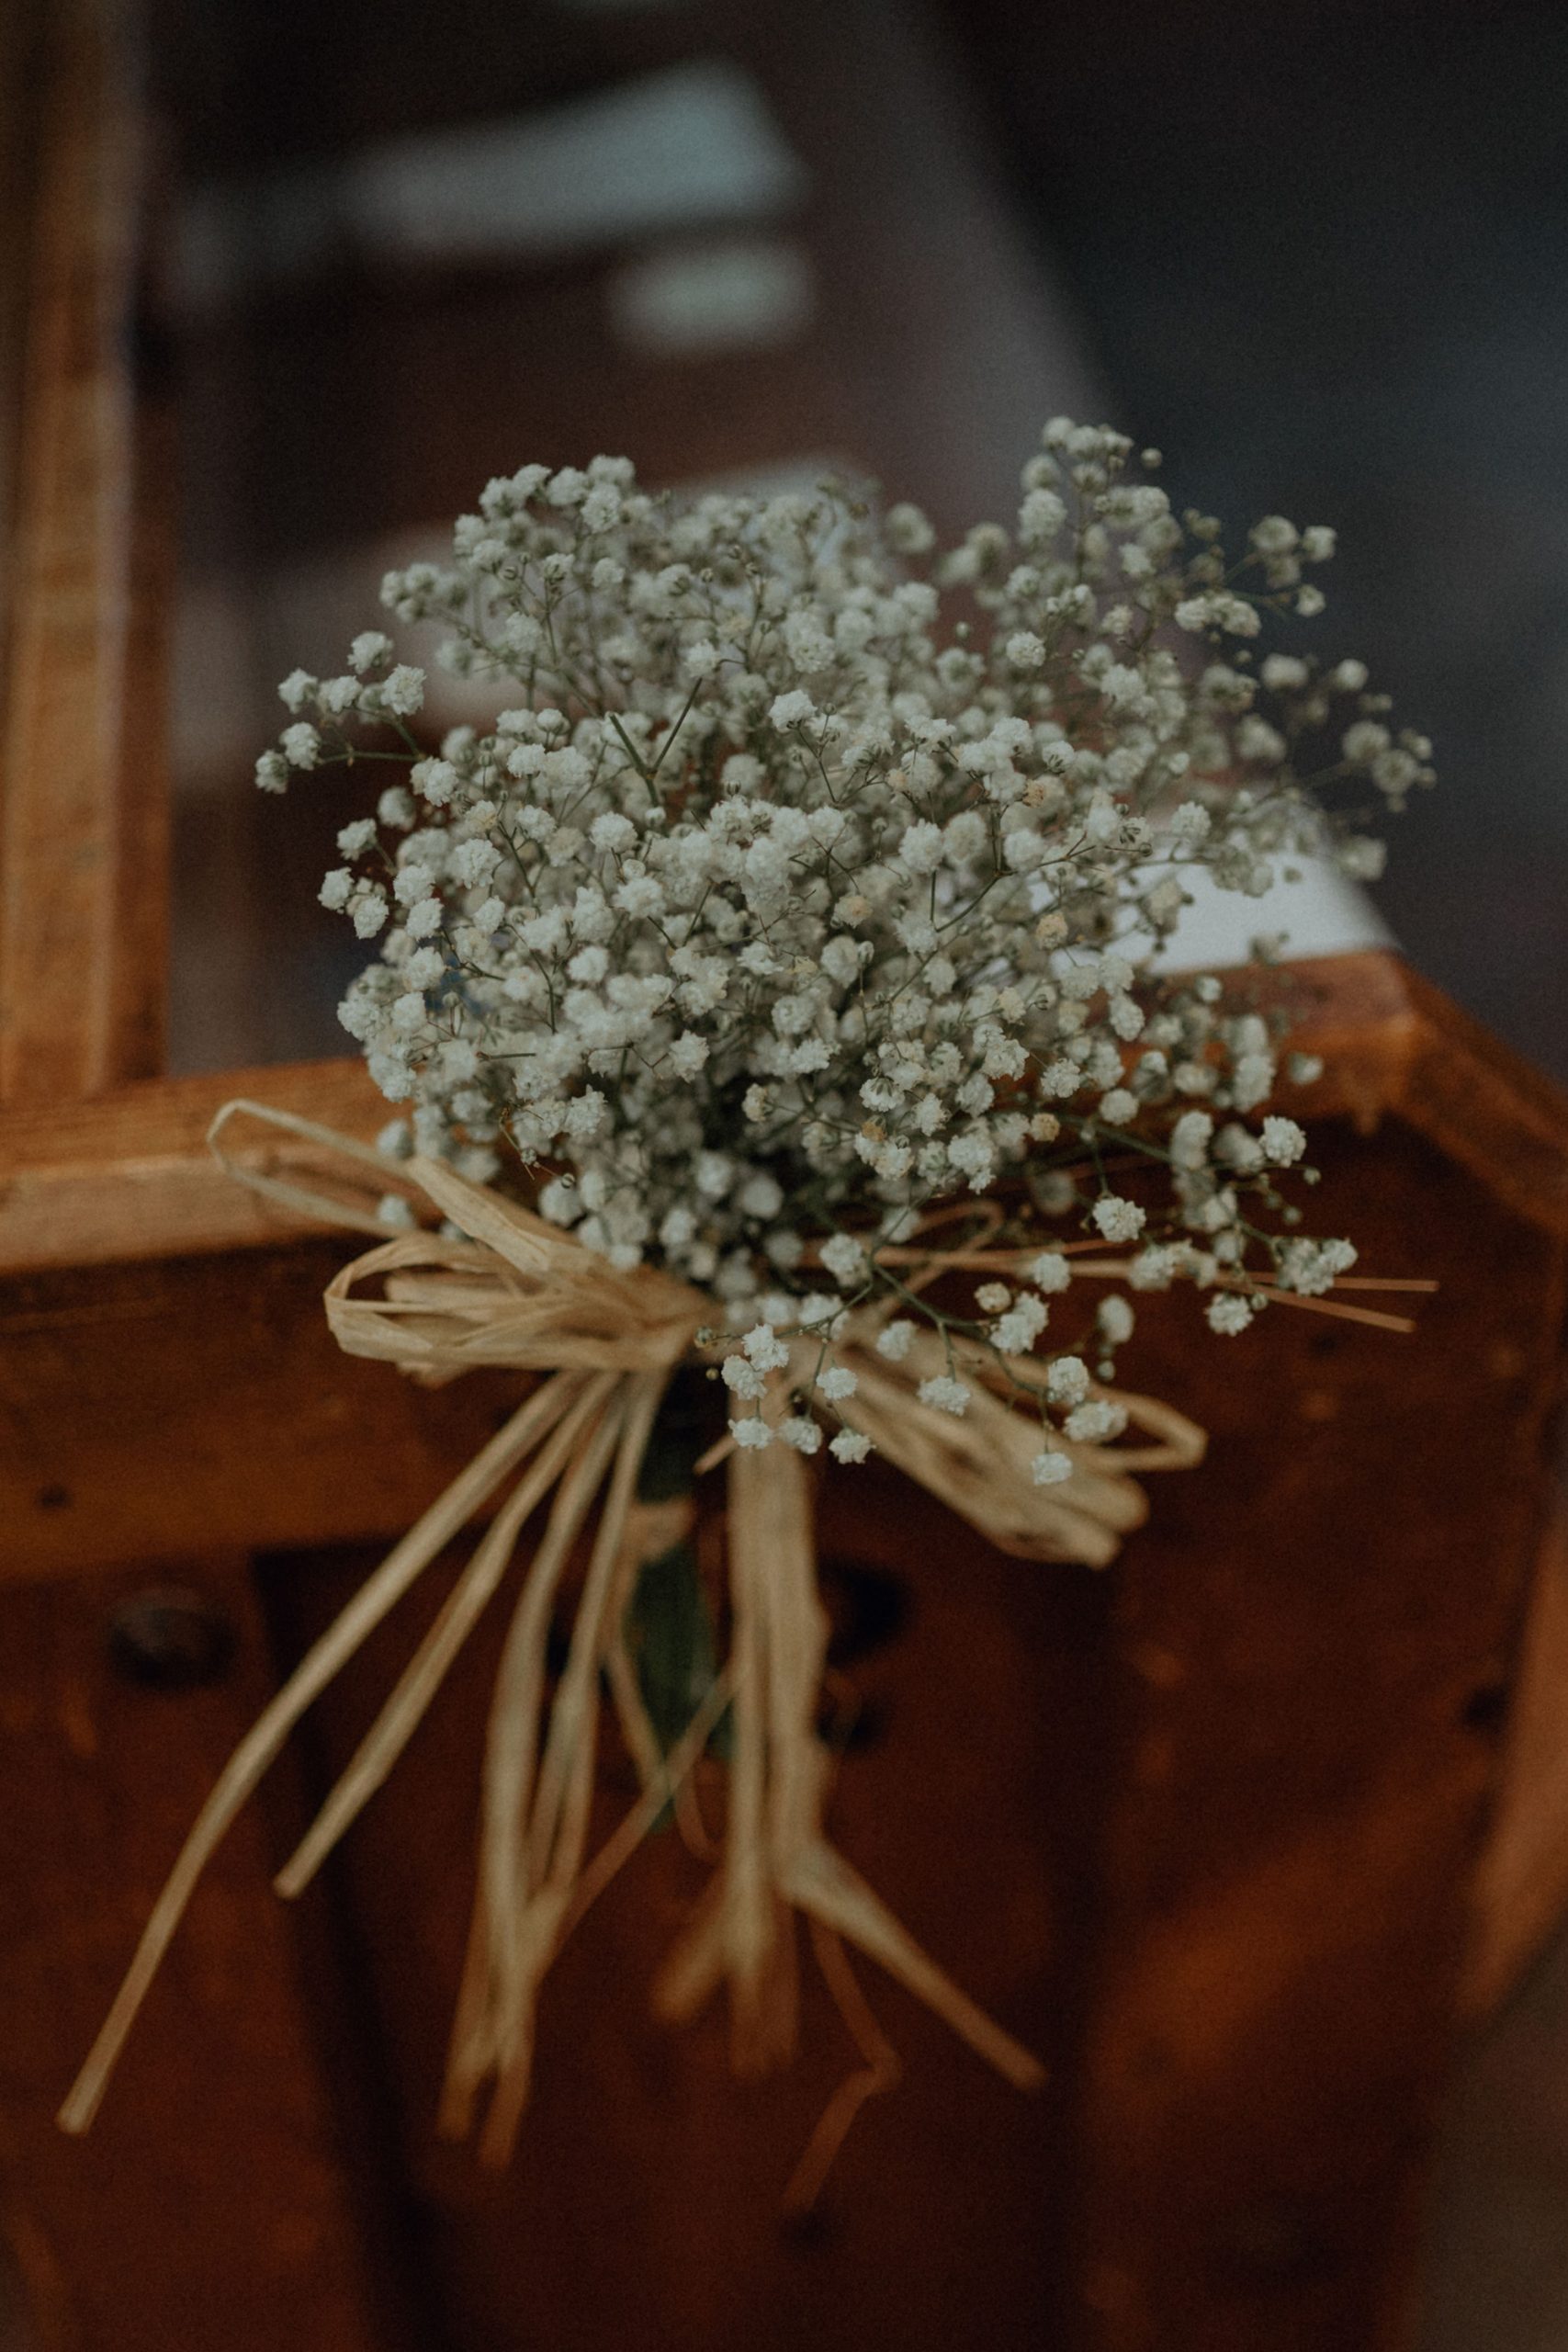 Naomi Janoux Rustic Festival Wedding Belle Art Photography SBS 006 scaled